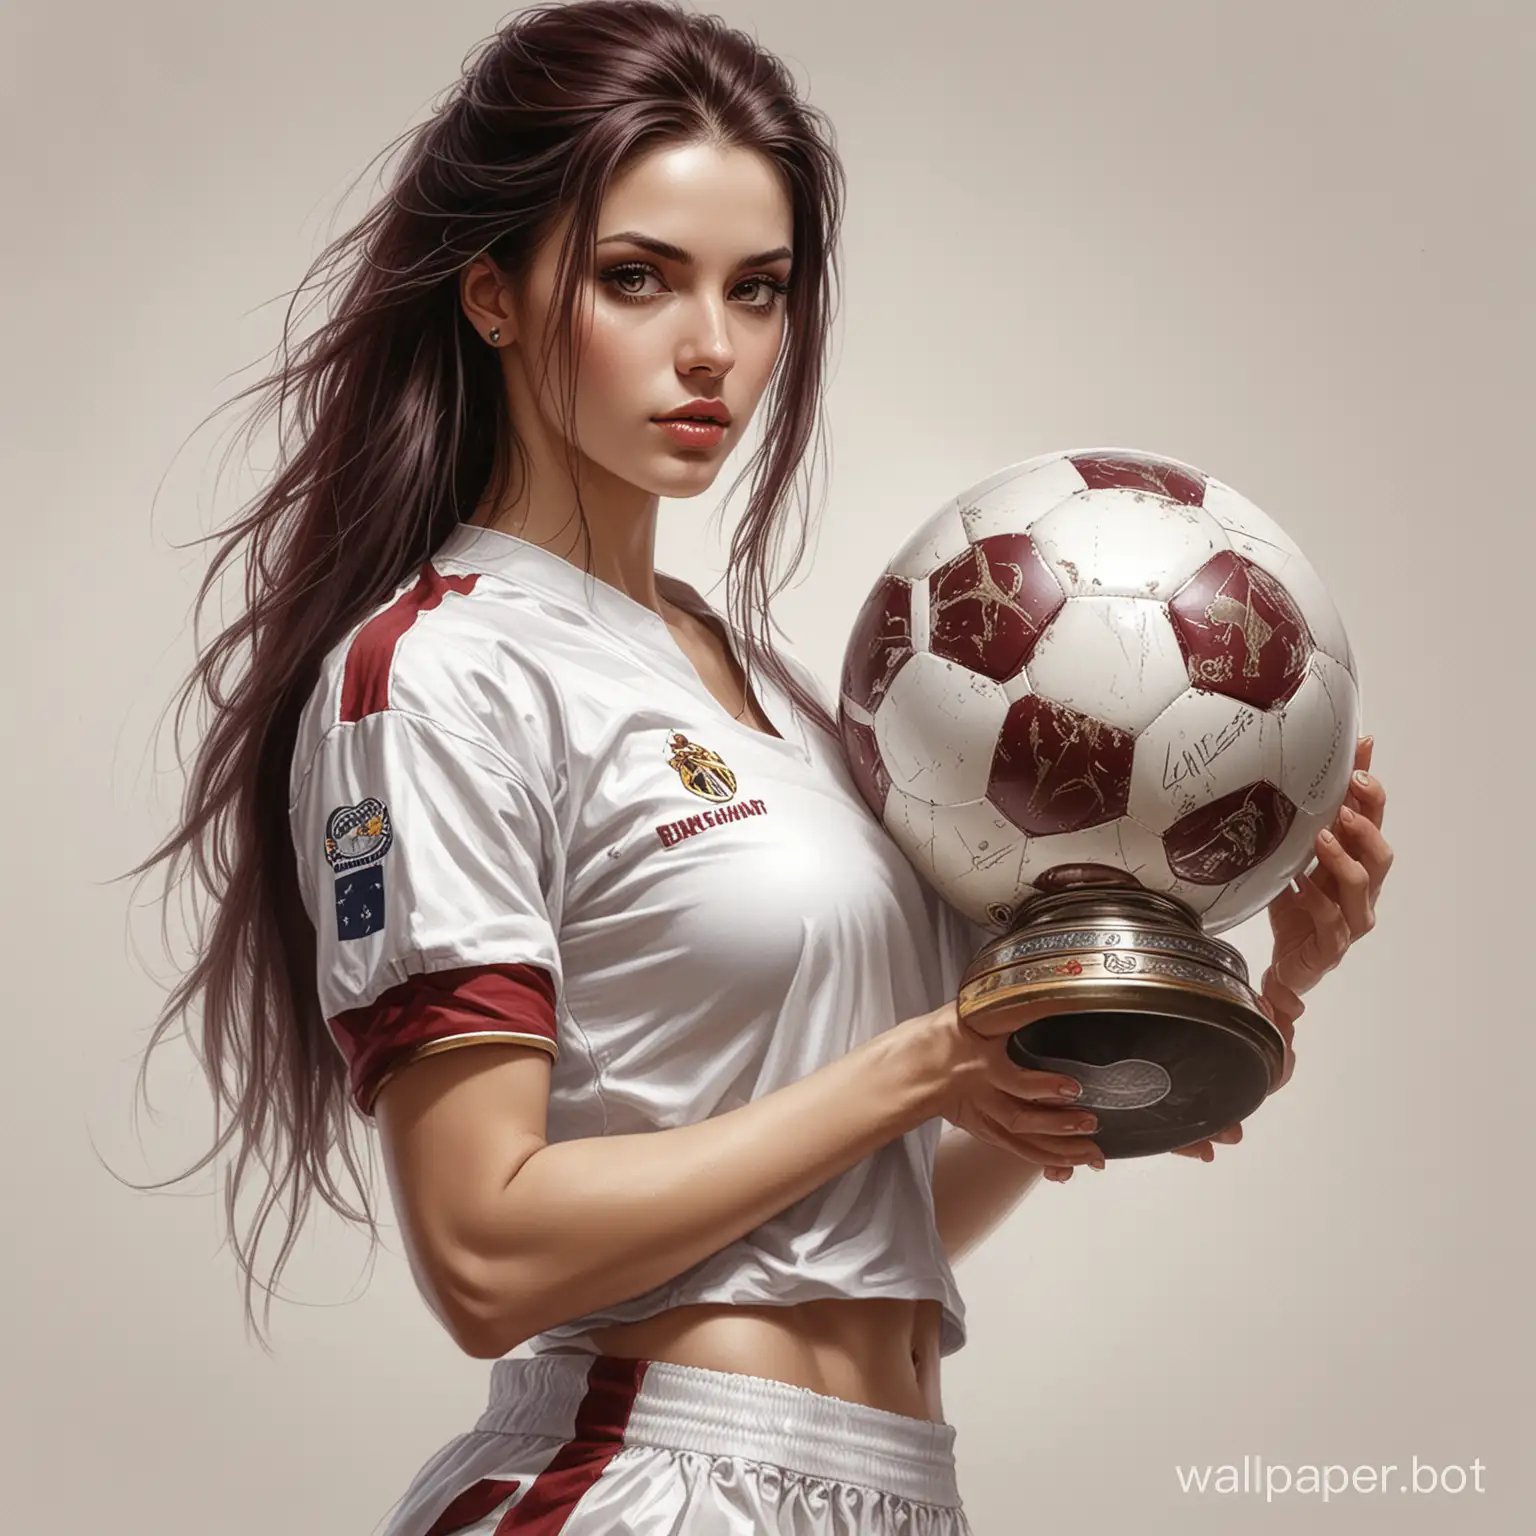 sketch Bosnian girl 25 years old dark long hair 6 breast size narrow waist In burgundy with white soccer uniform holds a large champions cup white background high realism Style Luis Royo sketch